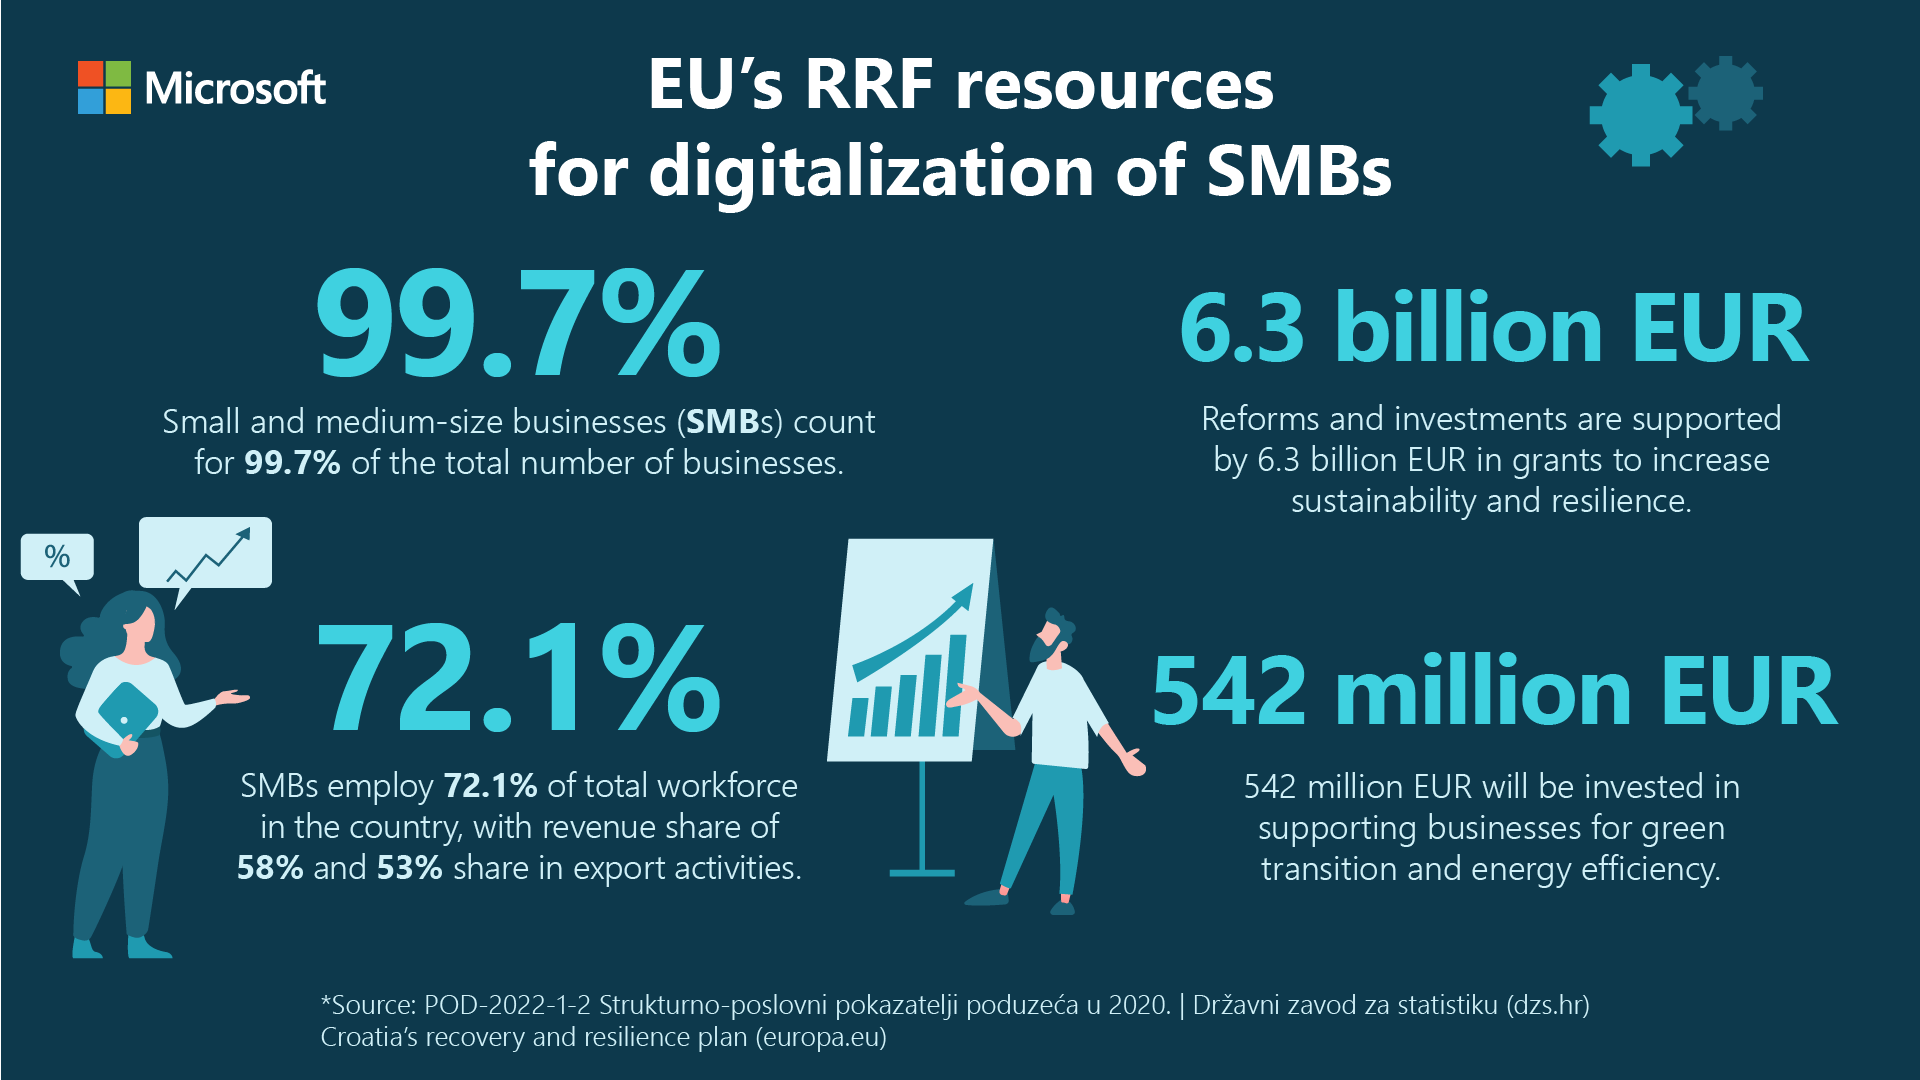 Small and medium enterprises in Croatia can digitalize using resources from EU’s Recovery and Resilience plan